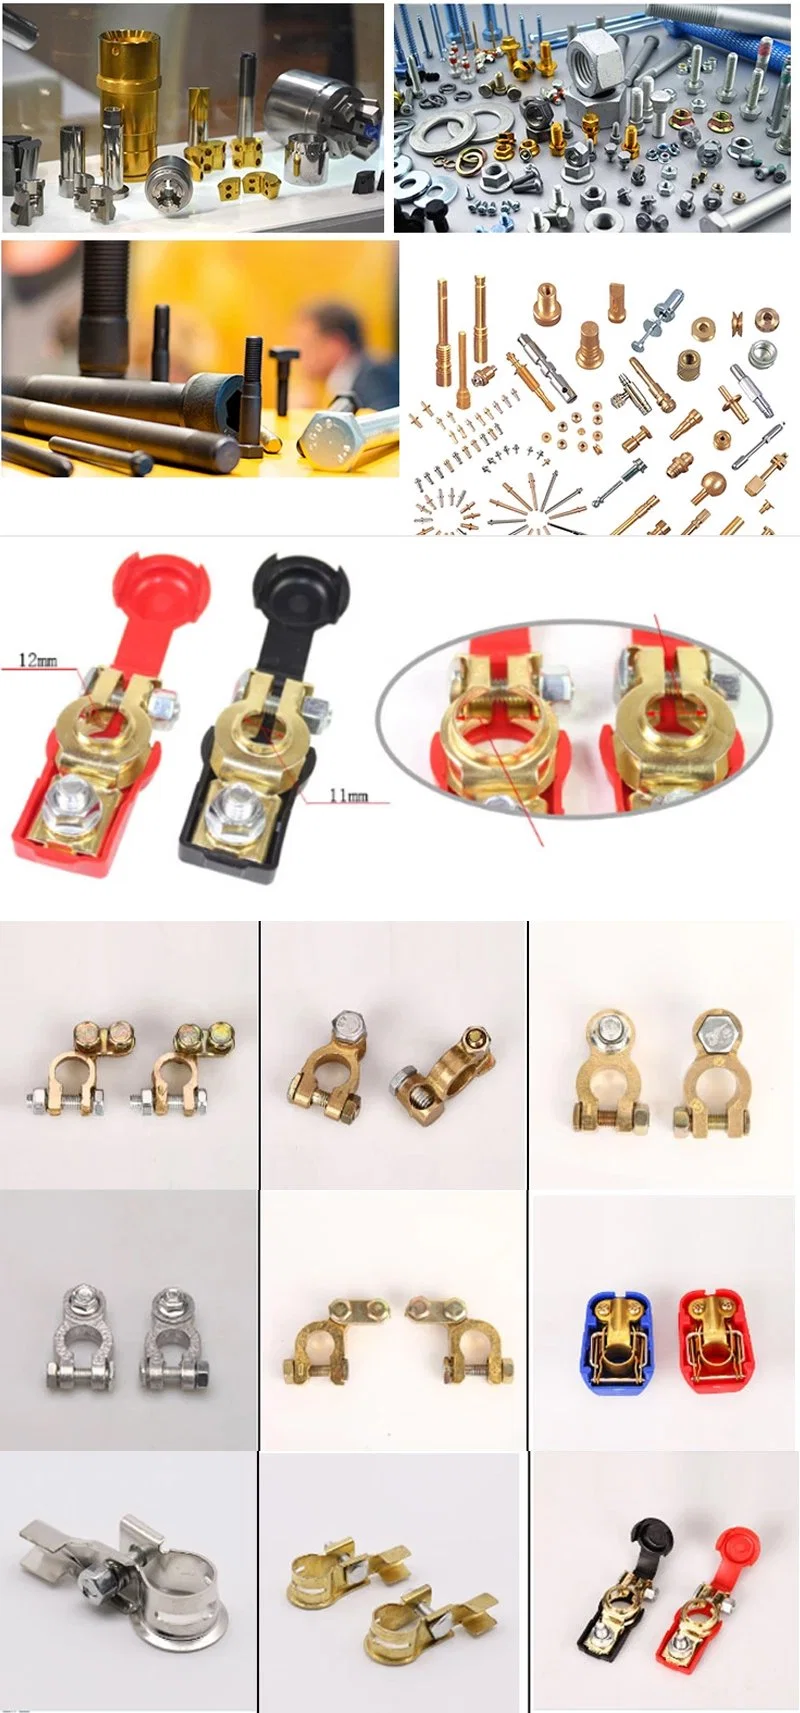 Heavy Duty Wire Lugs, Battery Cable Ends, Bare Copper Eyelets, Tubular Ring Terminals, Closed End Crimp Connectors